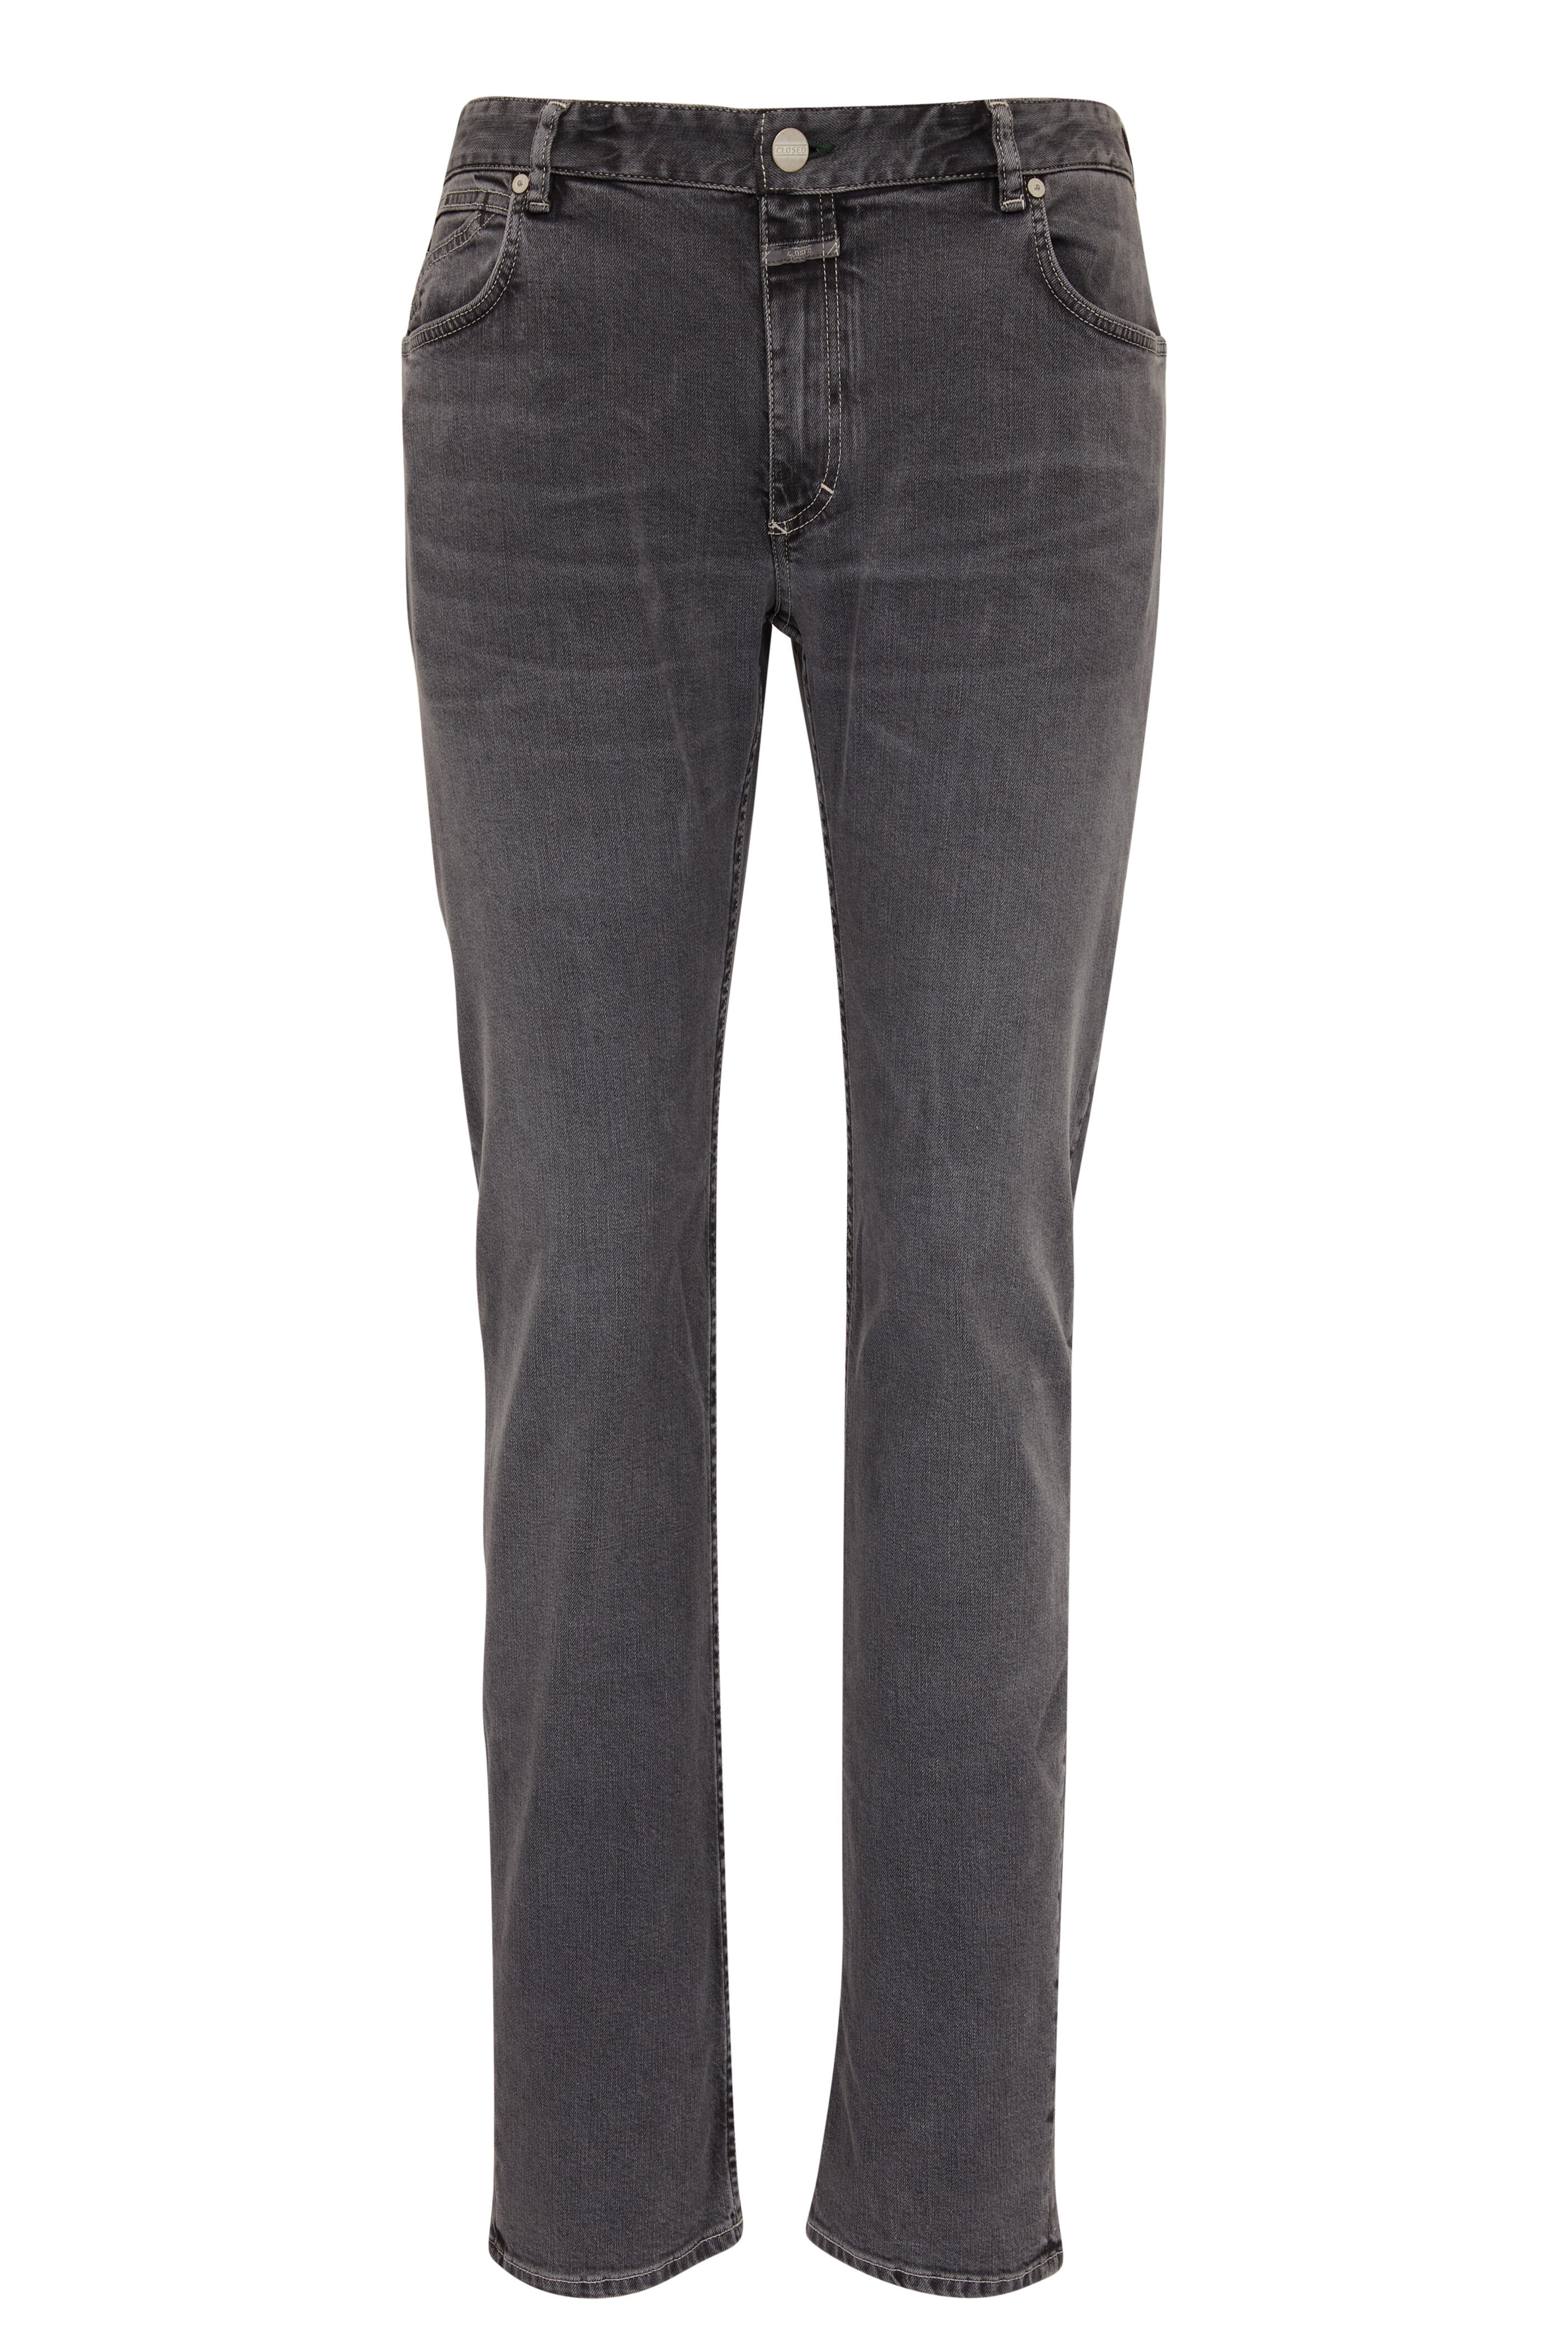 Closed - Unity Mid Gray Slim Fit Jean | Mitchell Stores